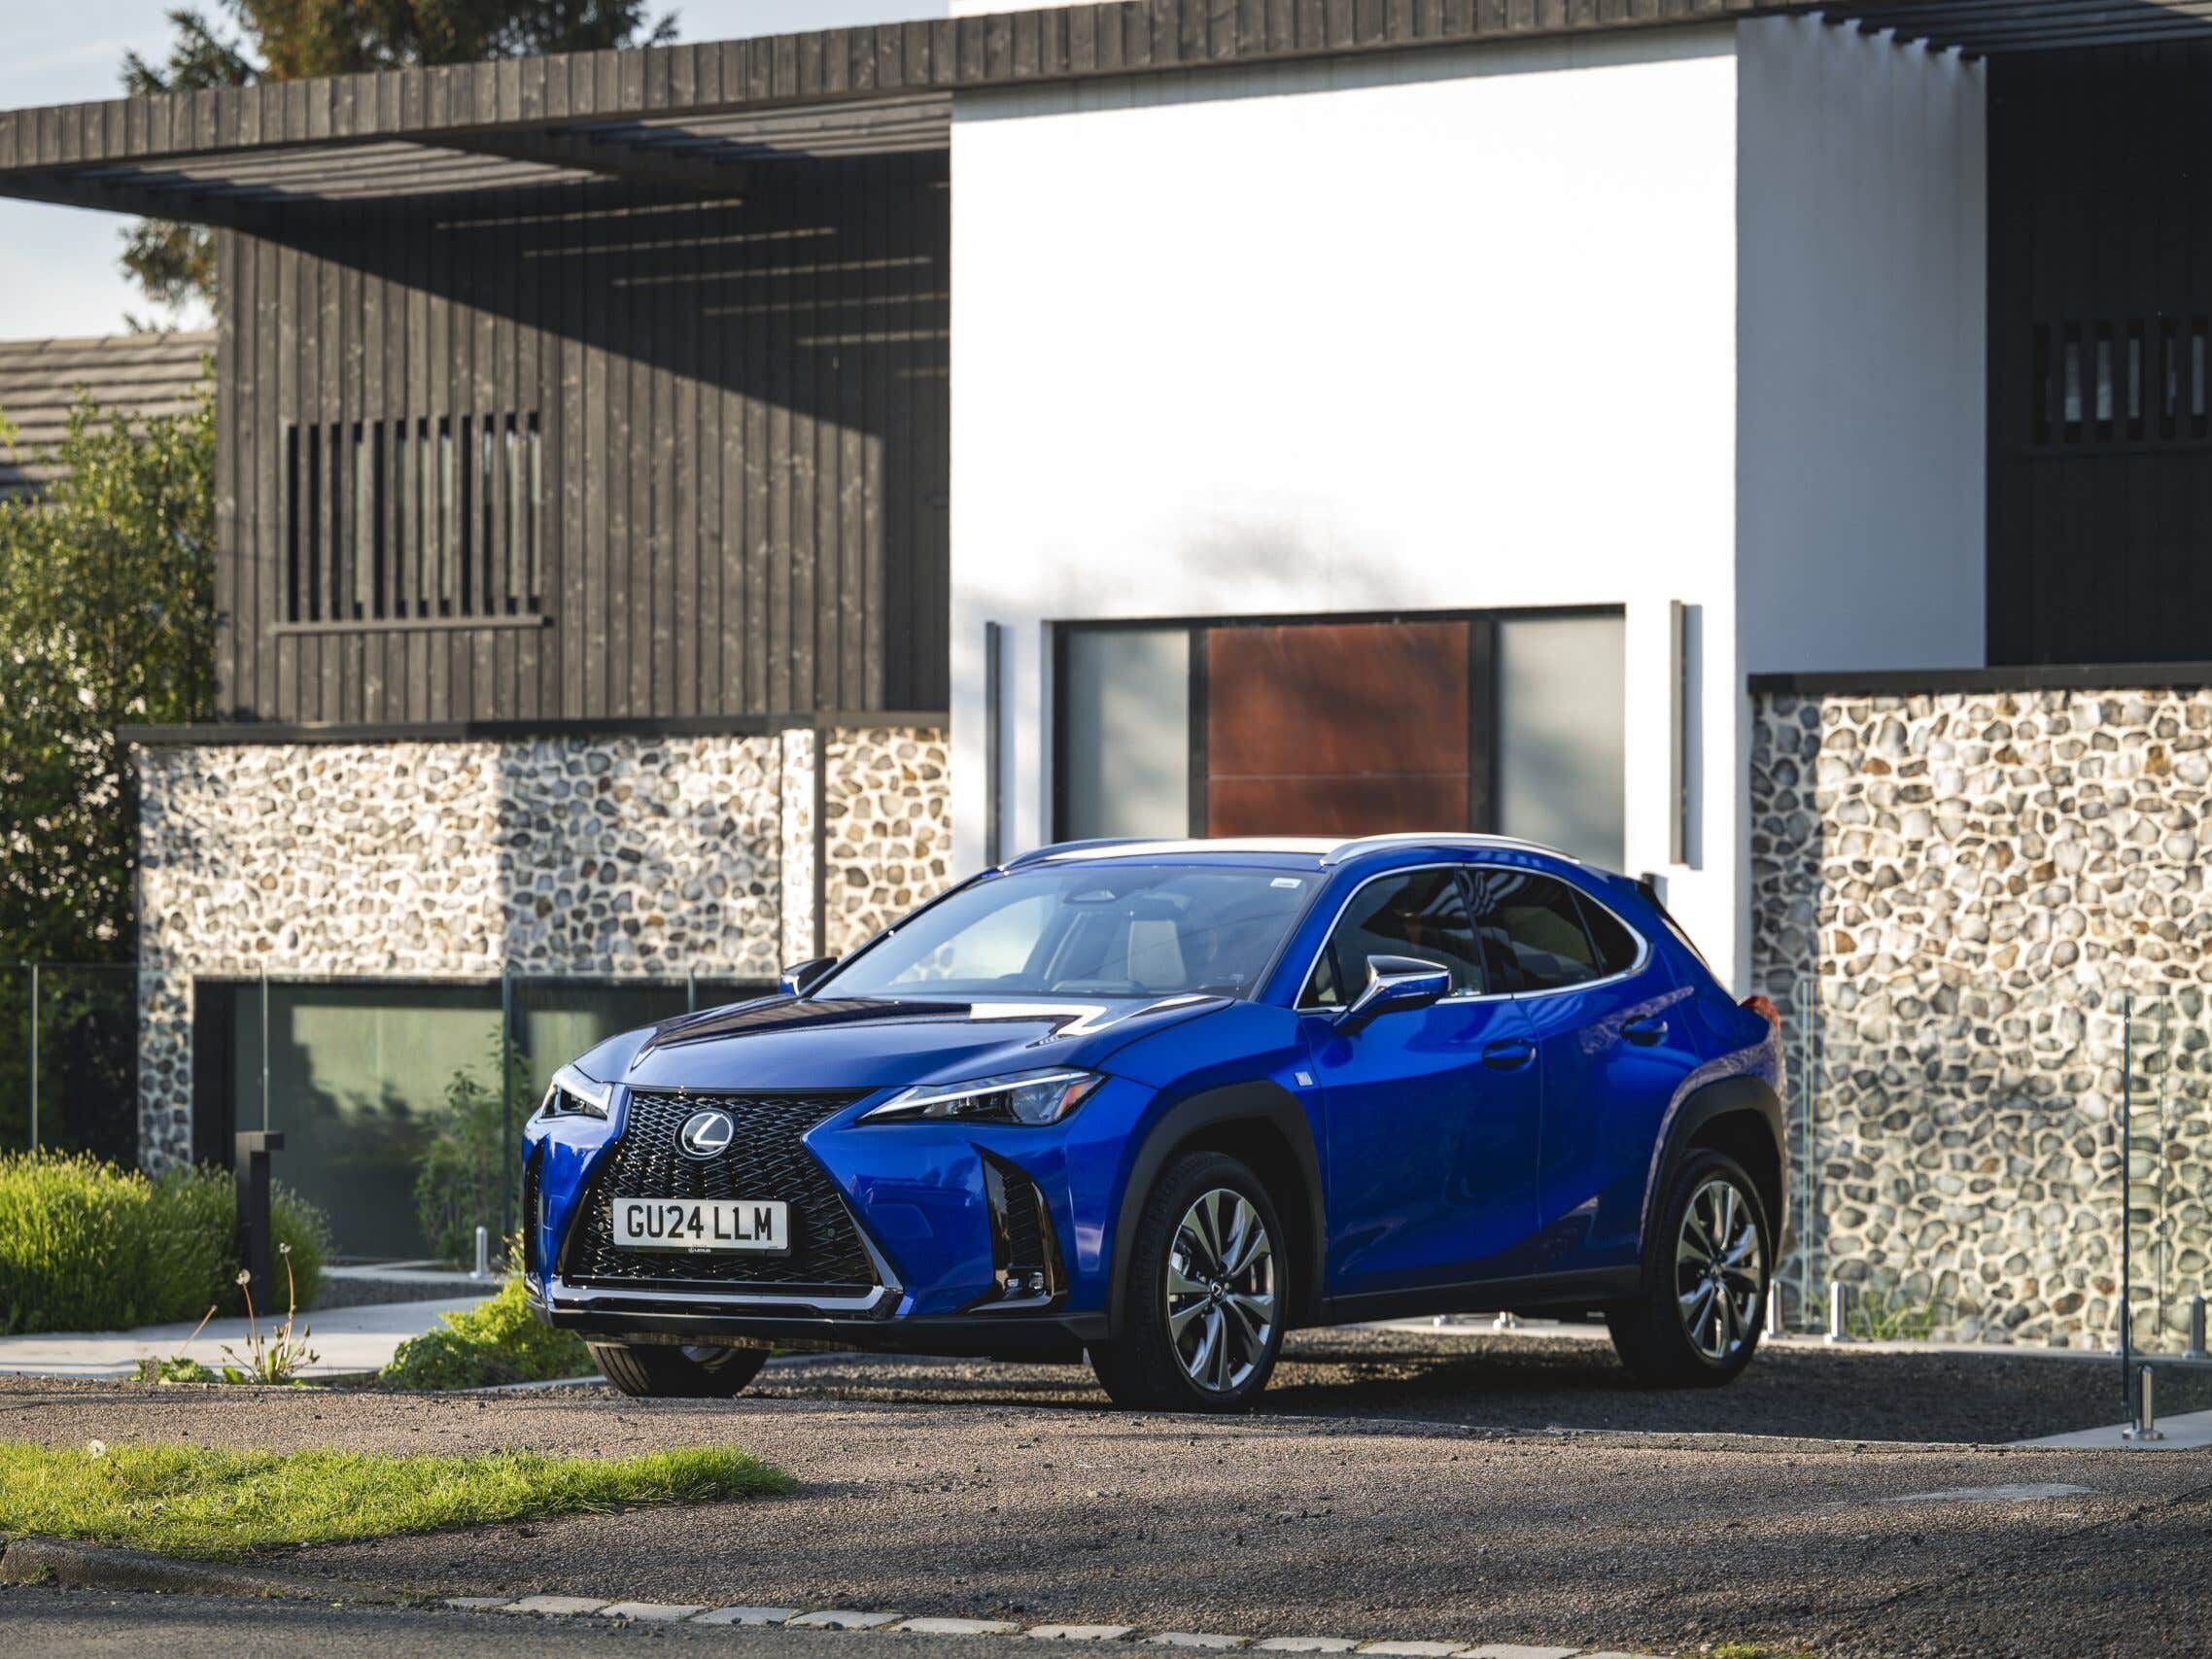 UK drive: The Lexus UX receives a bigger engine, but does that make it better than the old 250?